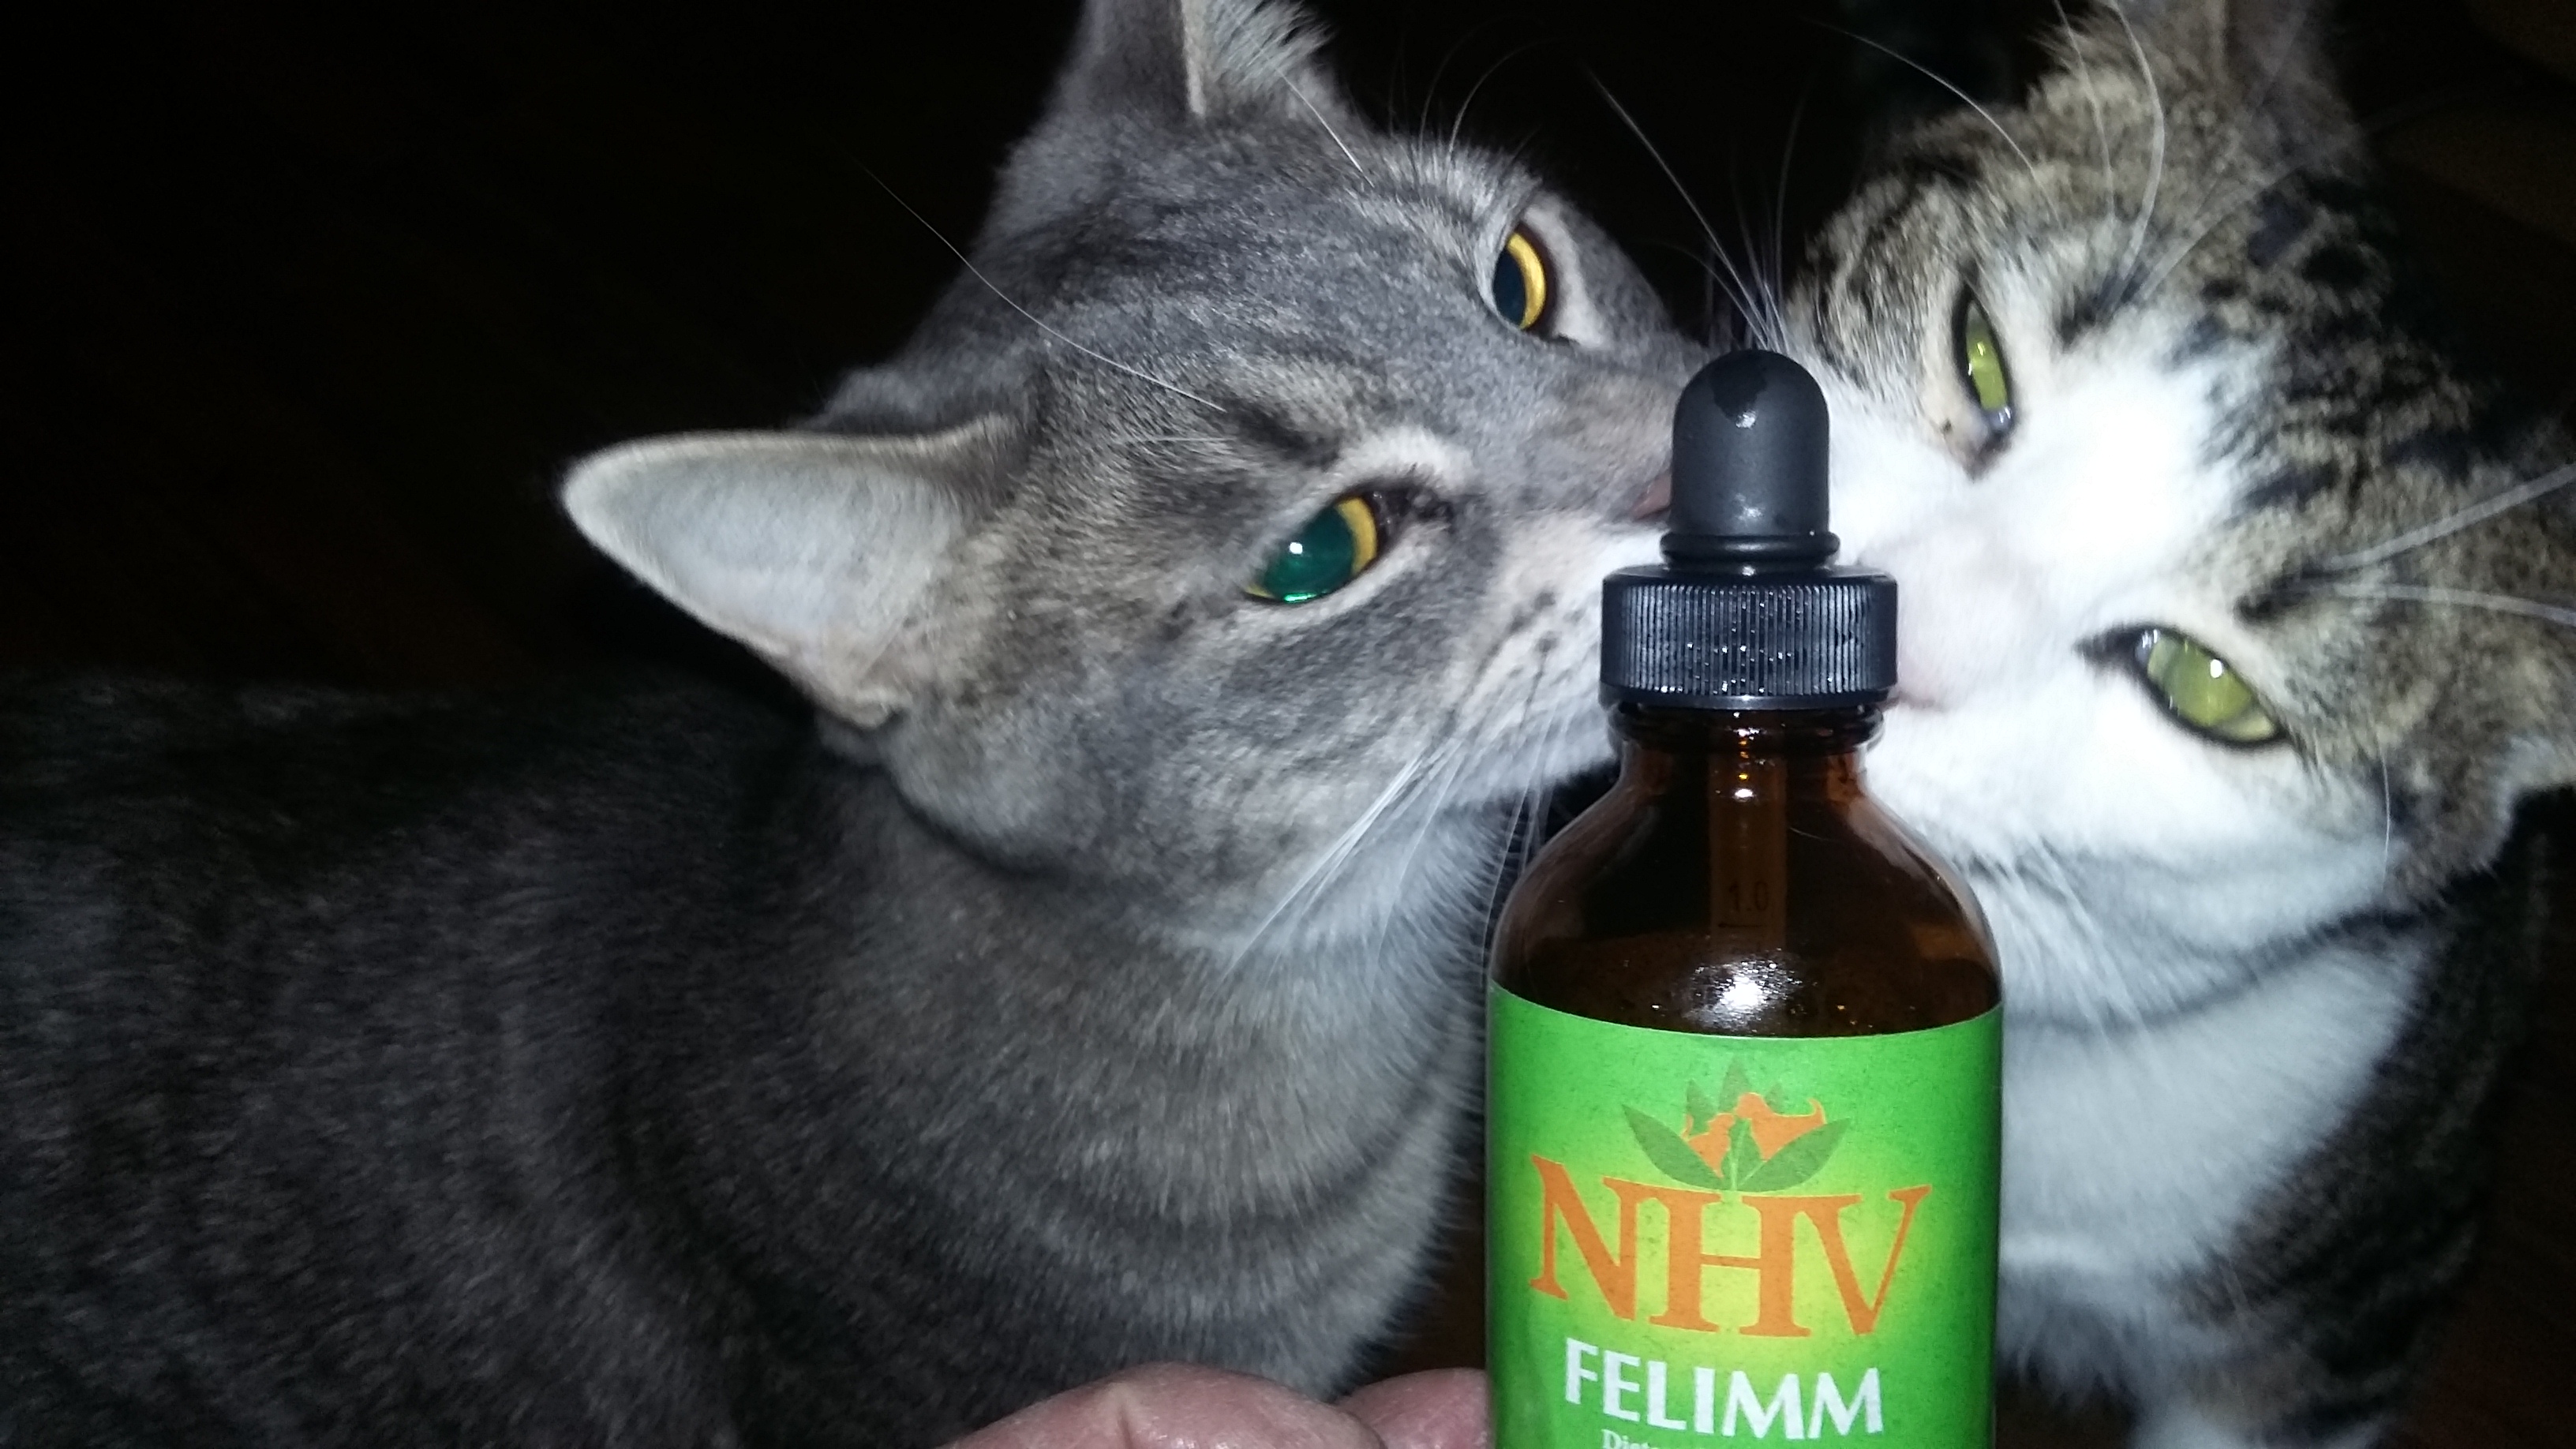 feline leukemia cats cRUSH AND cHARLOTTE POSING WITH THEIR HERBAL REMEDY NHV Felimm